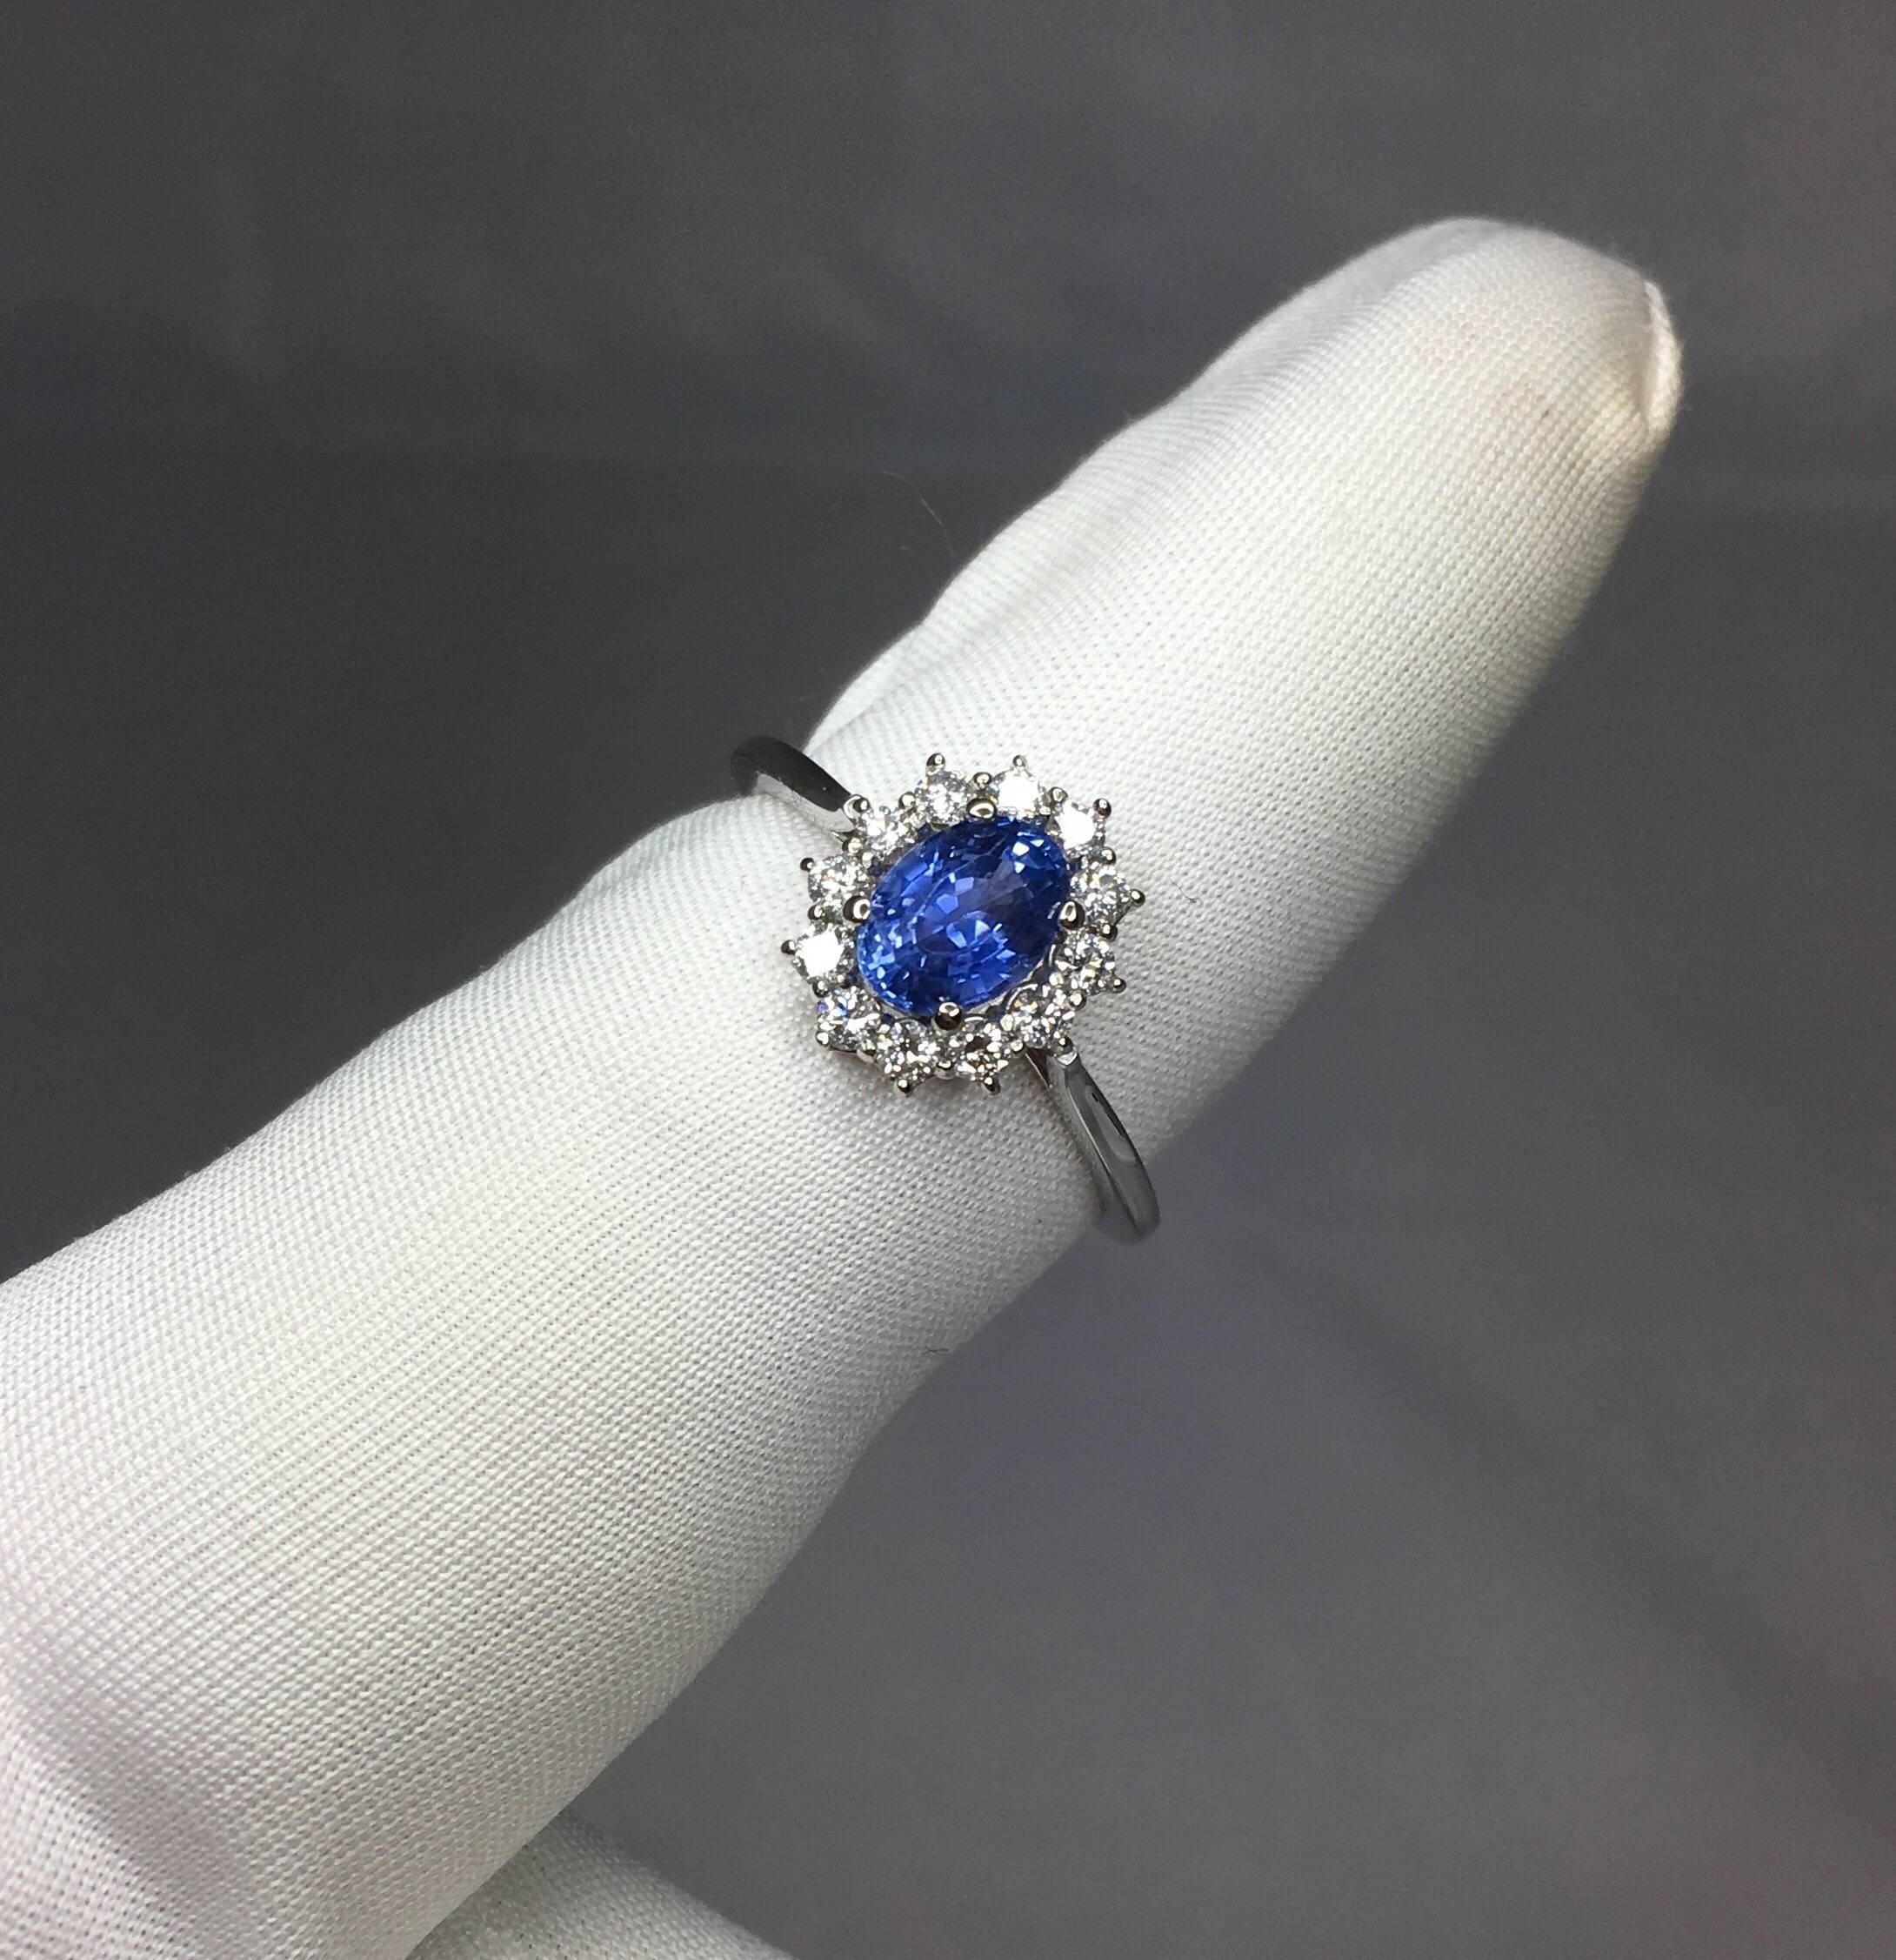 Women's or Men's GIA Certified 1.01 Carat Untreated Ceylon Blue Sapphire, Gold and Diamond Ring